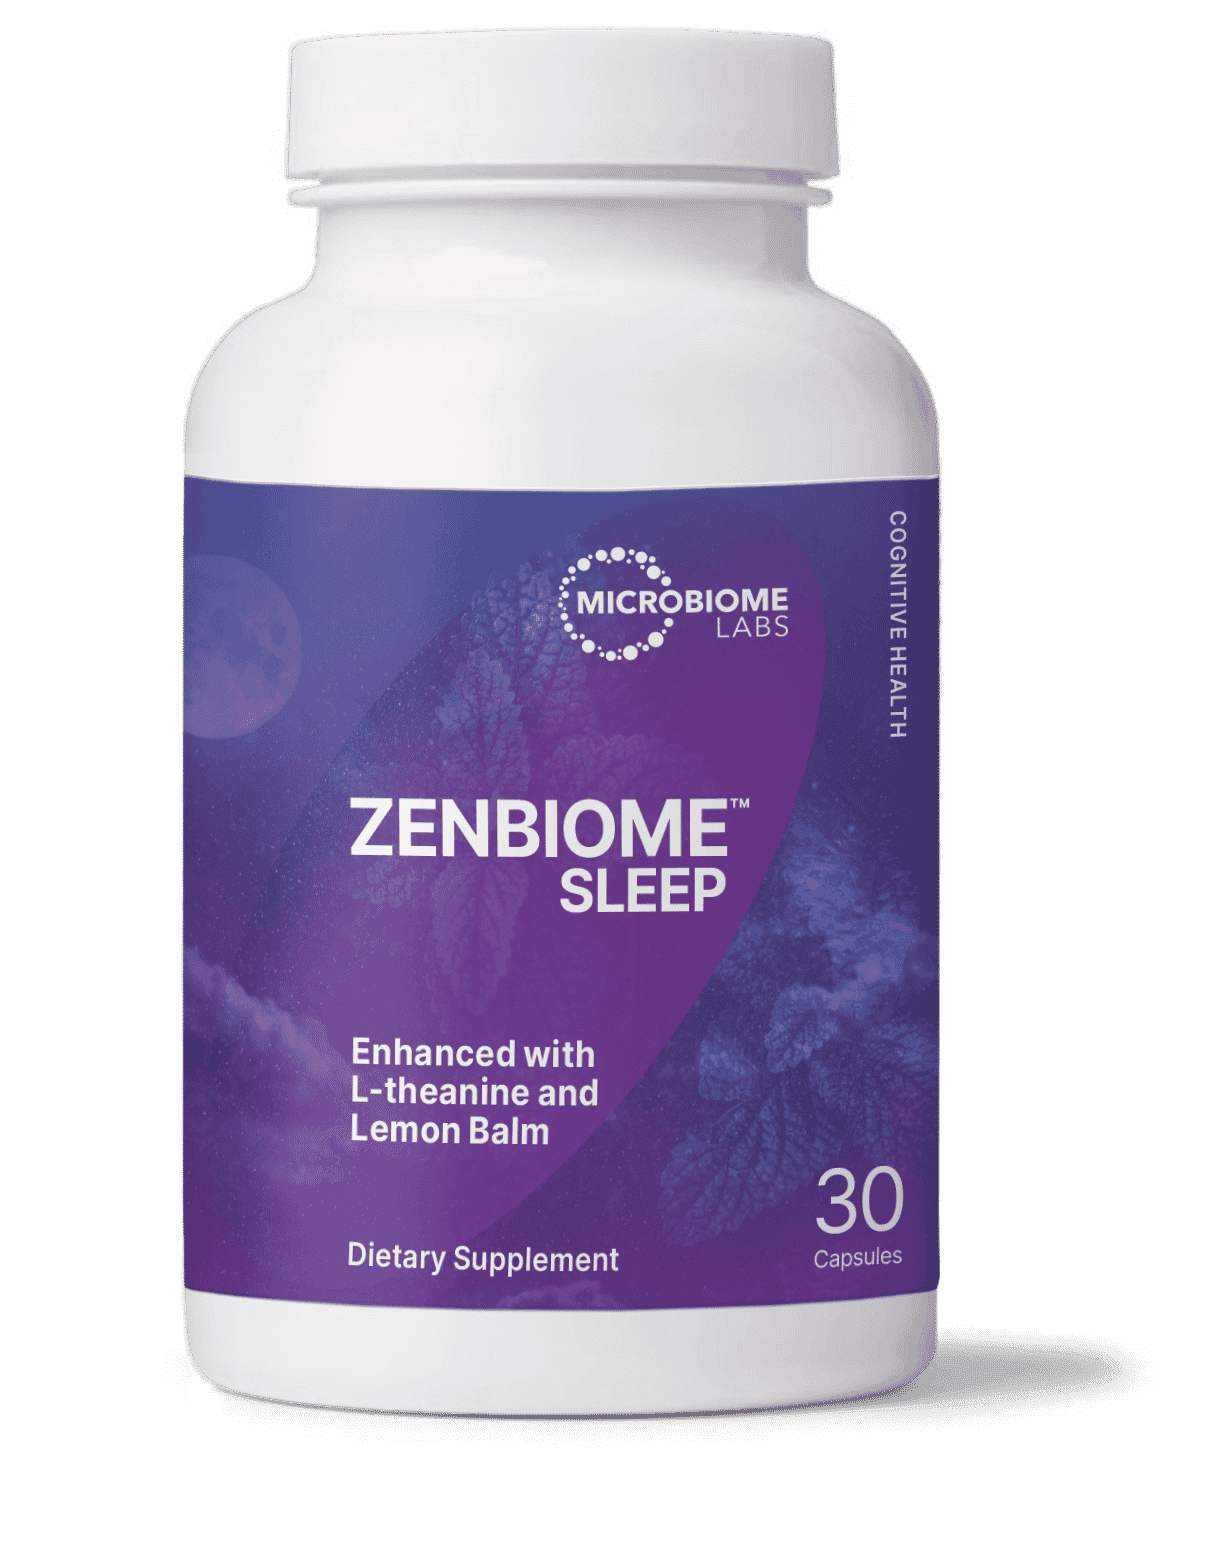 ZenBiome Sleep by Microbiome Labs New Branding Bottle